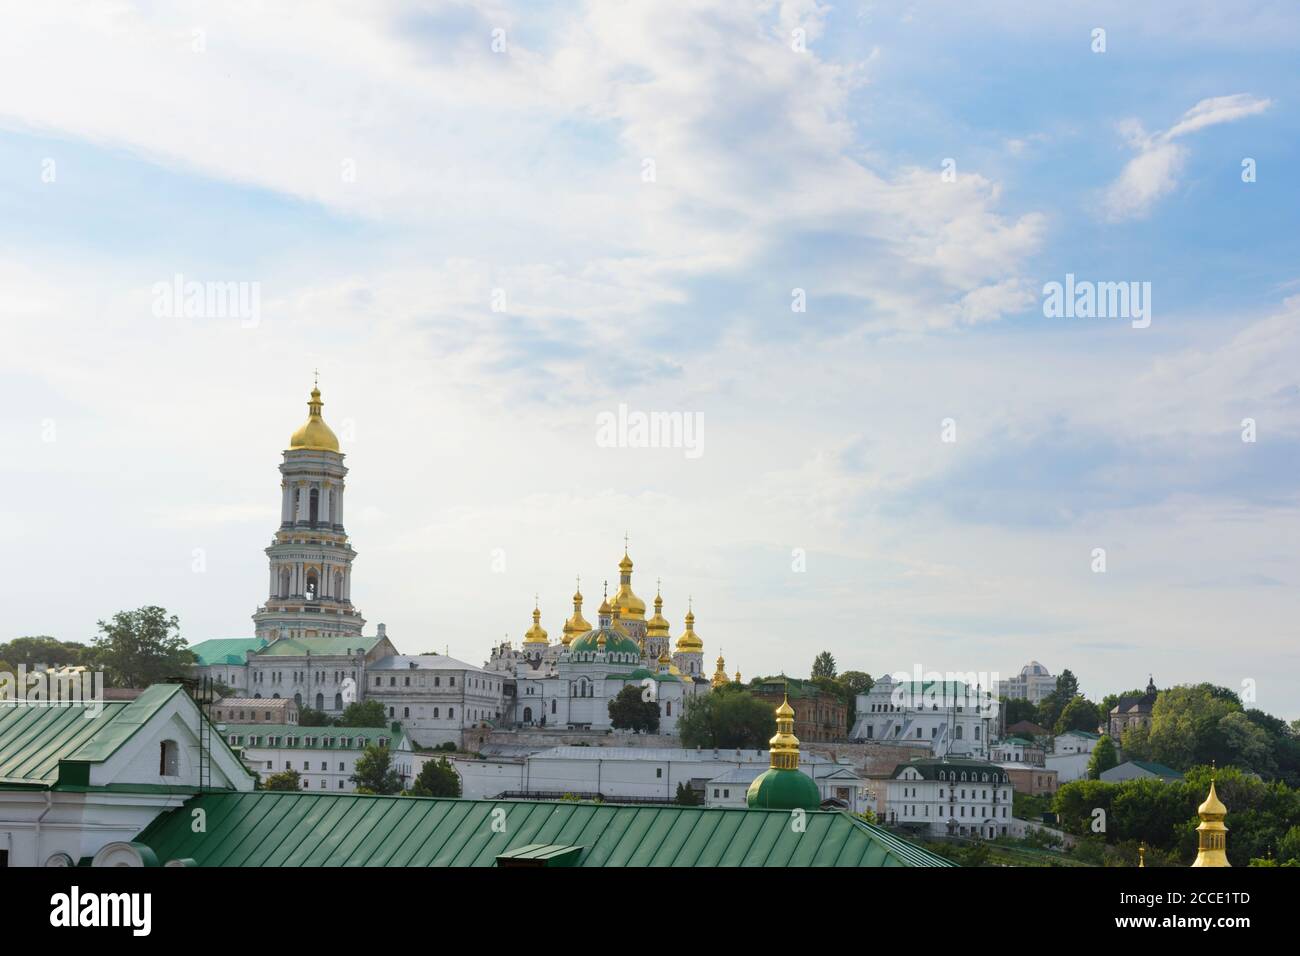 Kiev (Kyiv), Great Lavra Belltower, Dormition Cathedral (right), at Pechersk Lavra (Monastery of the Caves), historic Orthodox Christian monastery in Stock Photo